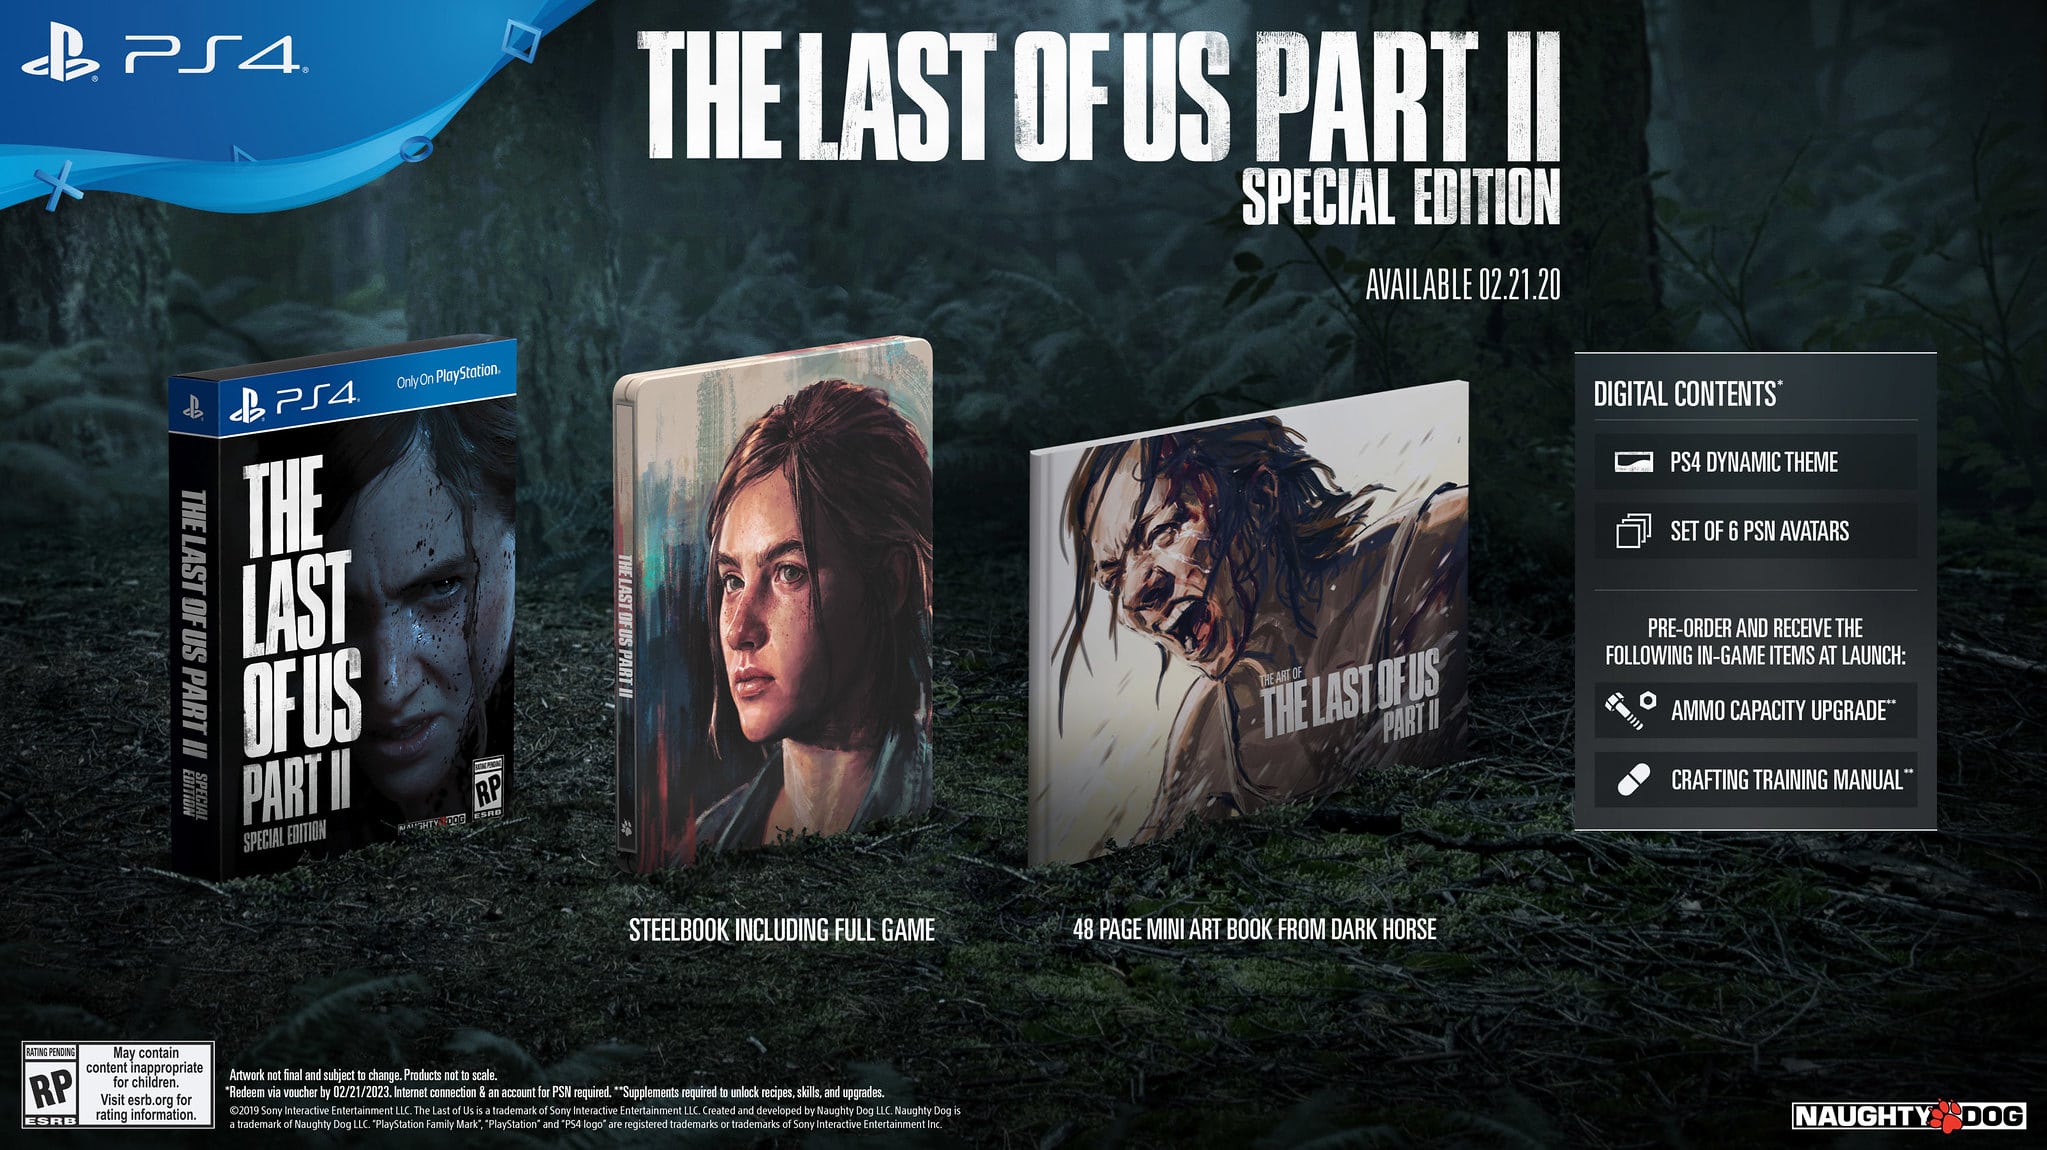 The last of us : part ii special edition